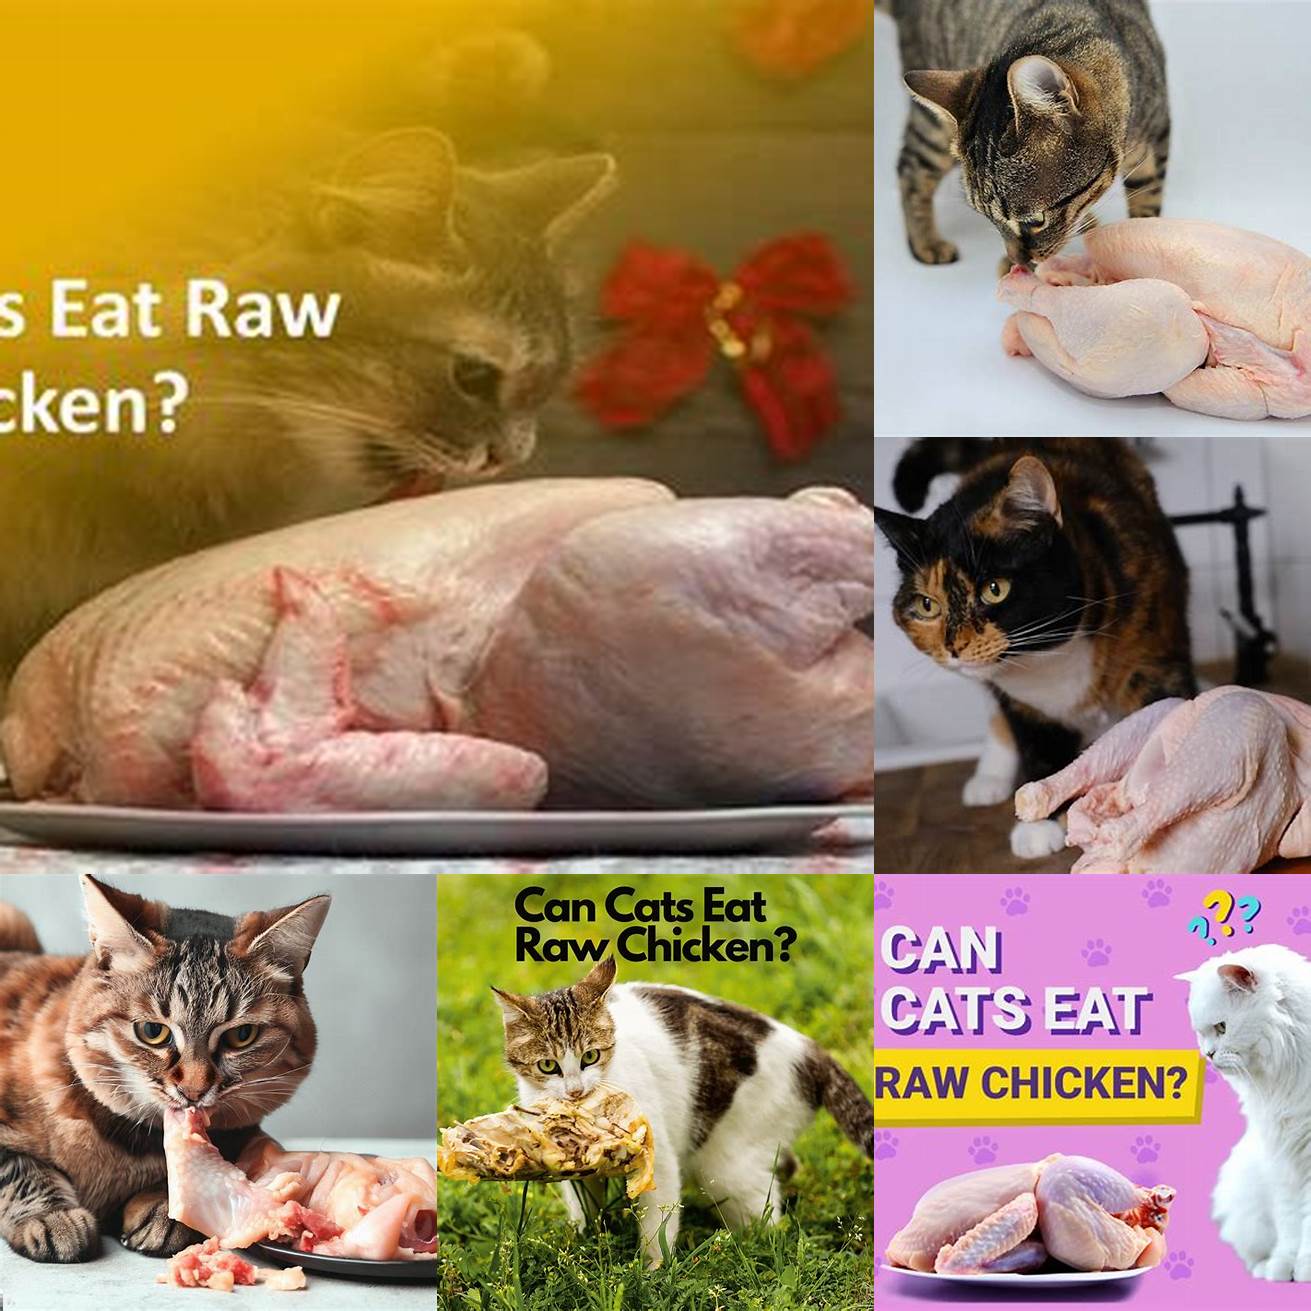 Q Can cats eat raw chicken A Yes cats can eat raw chicken but its important to handle it safely to avoid the risk of foodborne illness Always wash your hands and any surfaces that come into contact with raw chicken and store it in the refrigerator or freezer to prevent bacterial growth Q How much chicken should I feed my cat A The amount of chicken that you should feed your cat depends on their age weight and activity level A general rule of thumb is to feed your cat 2-3 ounces of chicken per day divided into two meals Q Can I feed my cat chicken bones A Yes but only if they are raw Cooked bones can splinter and cause injuries so its important to avoid them Q What are some other foods that I can feed my cat A Some other healthy foods for cats include fish eggs and lean meats like turkey and beef Its important to offer a variety of foods to ensure that your cat is getting a balanced diet